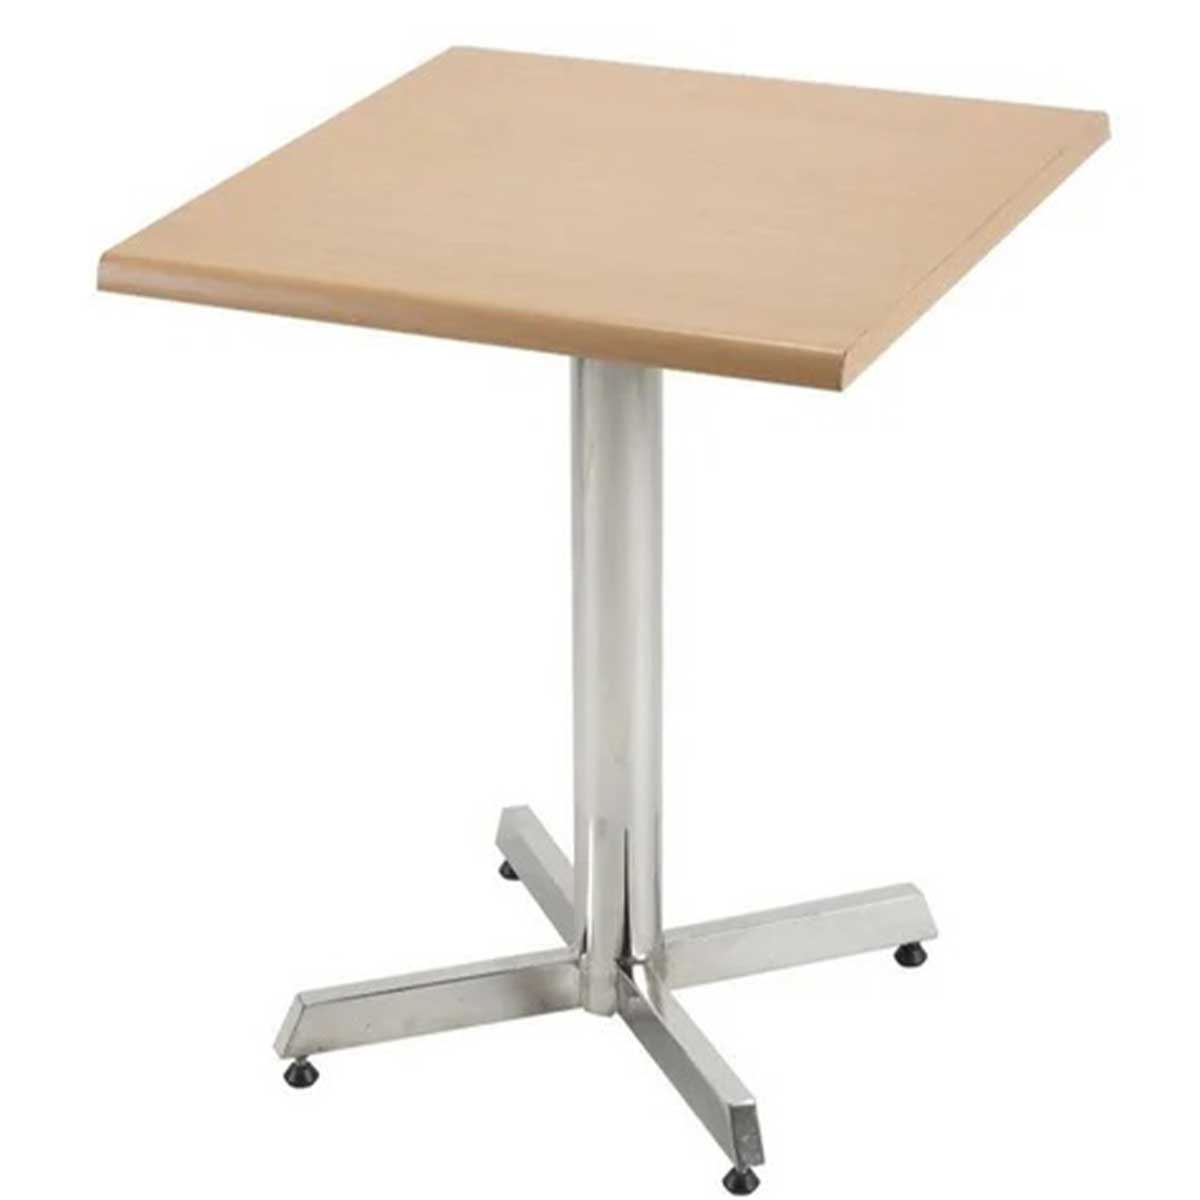 Cafeteria Benches Manufacturers, Suppliers, Exporters in Delhi 